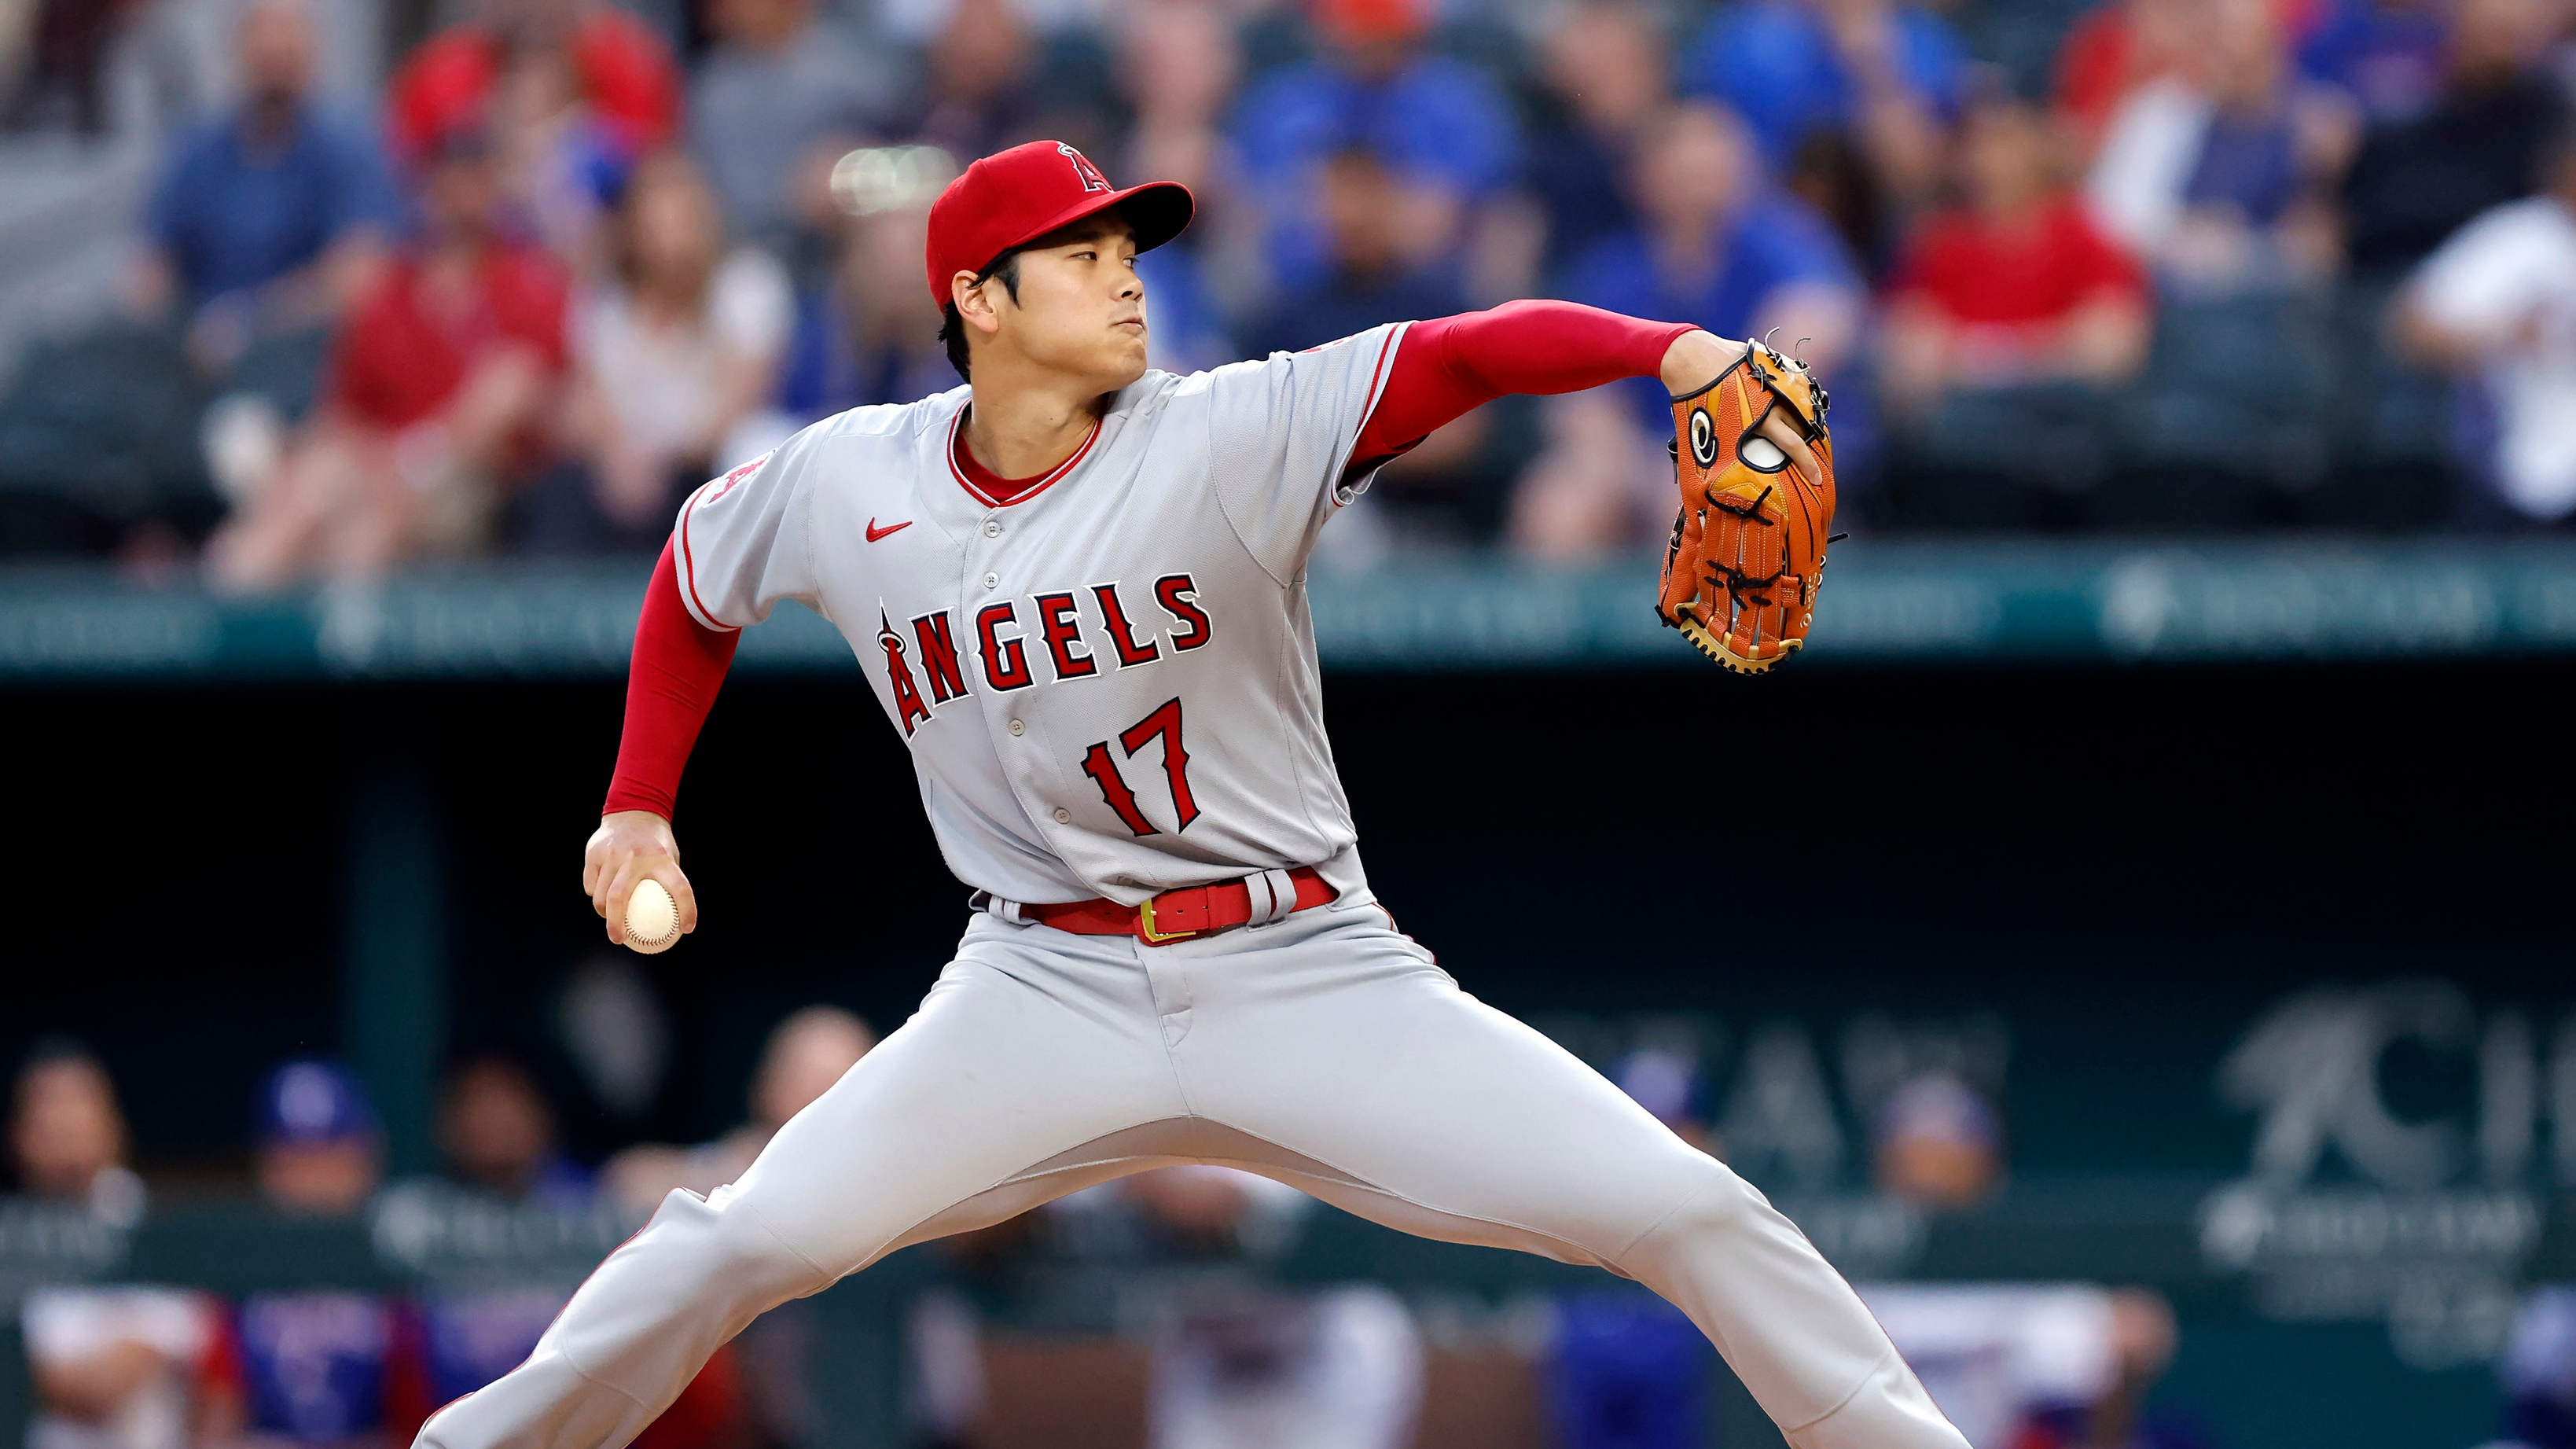 Shohei Ohtani staying with the Angels for now